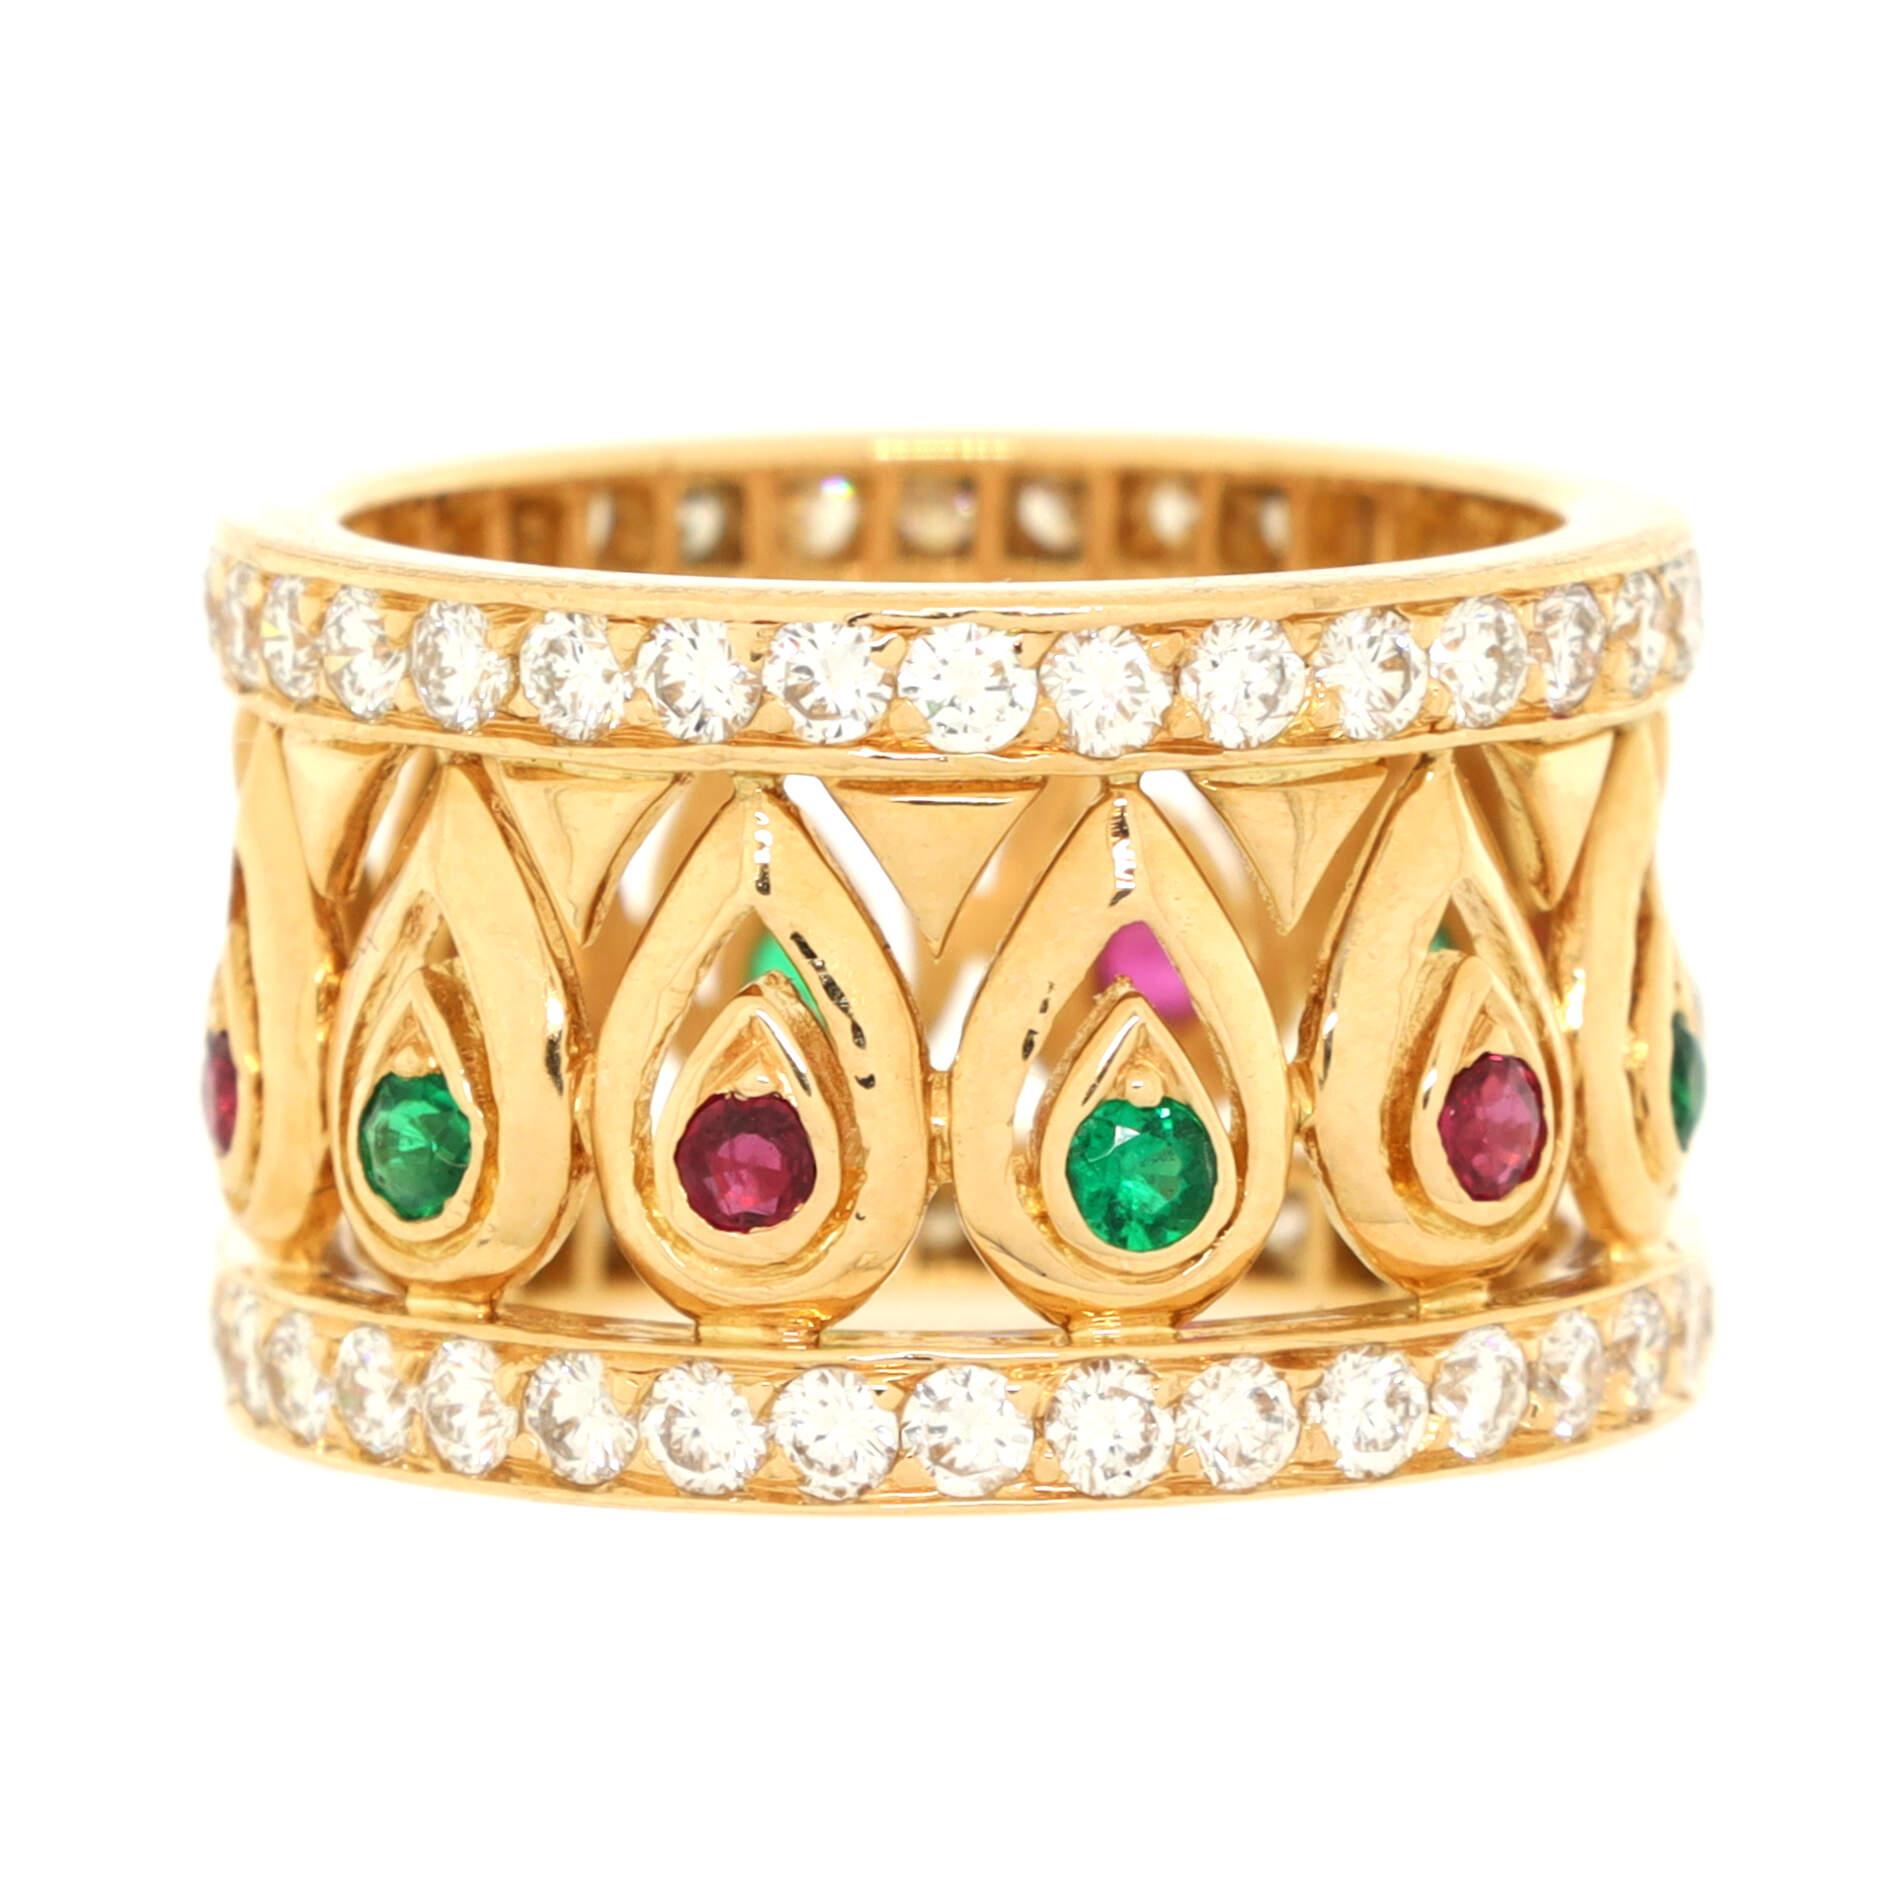 Condition: Very good. Moderate wear and re-polish throughout.
Accessories: No Accessories
Measurements: Size: 7.5 - 56, Width: 13.30 mm
Designer: Cartier
Model: Tanjore Band Ring 18K Yellow Gold with Rubies, Emeralds and Pave Diamonds
Exterior